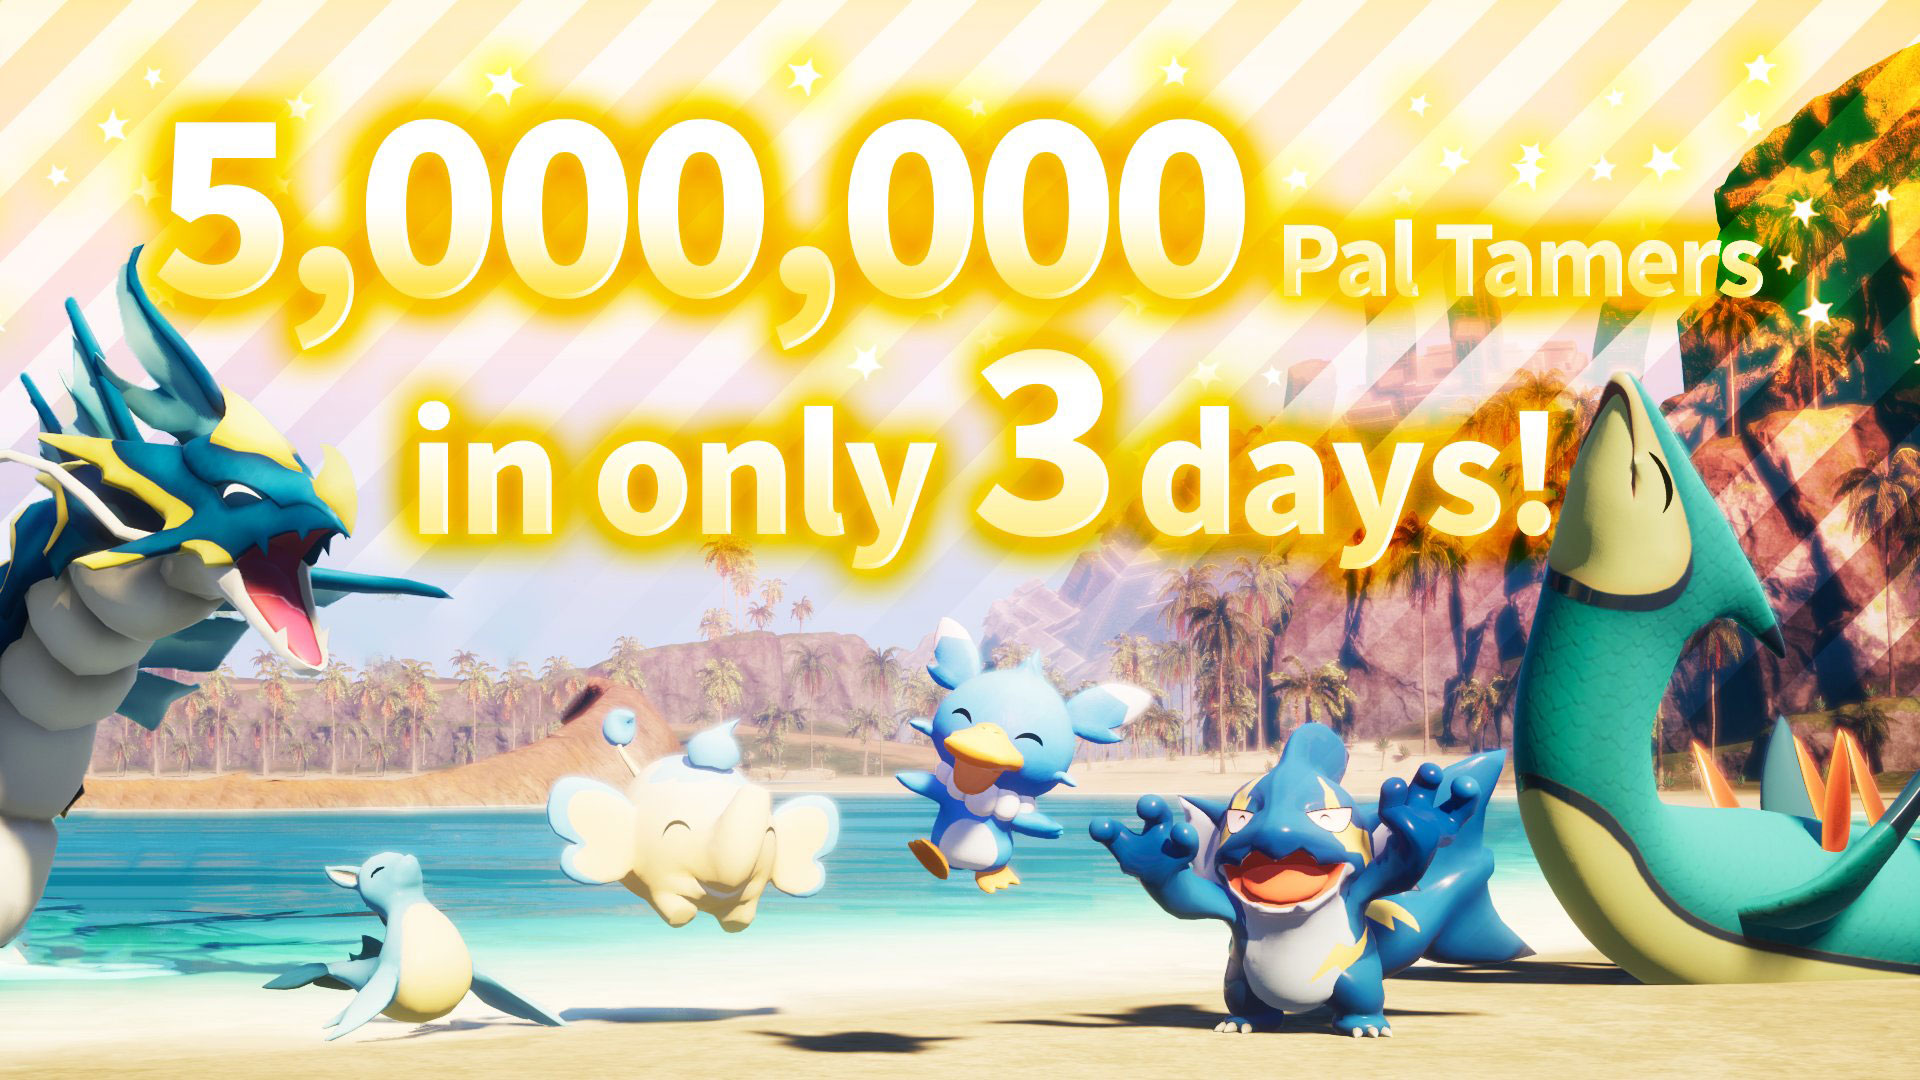 Palworld has sold over five million copies in just three days